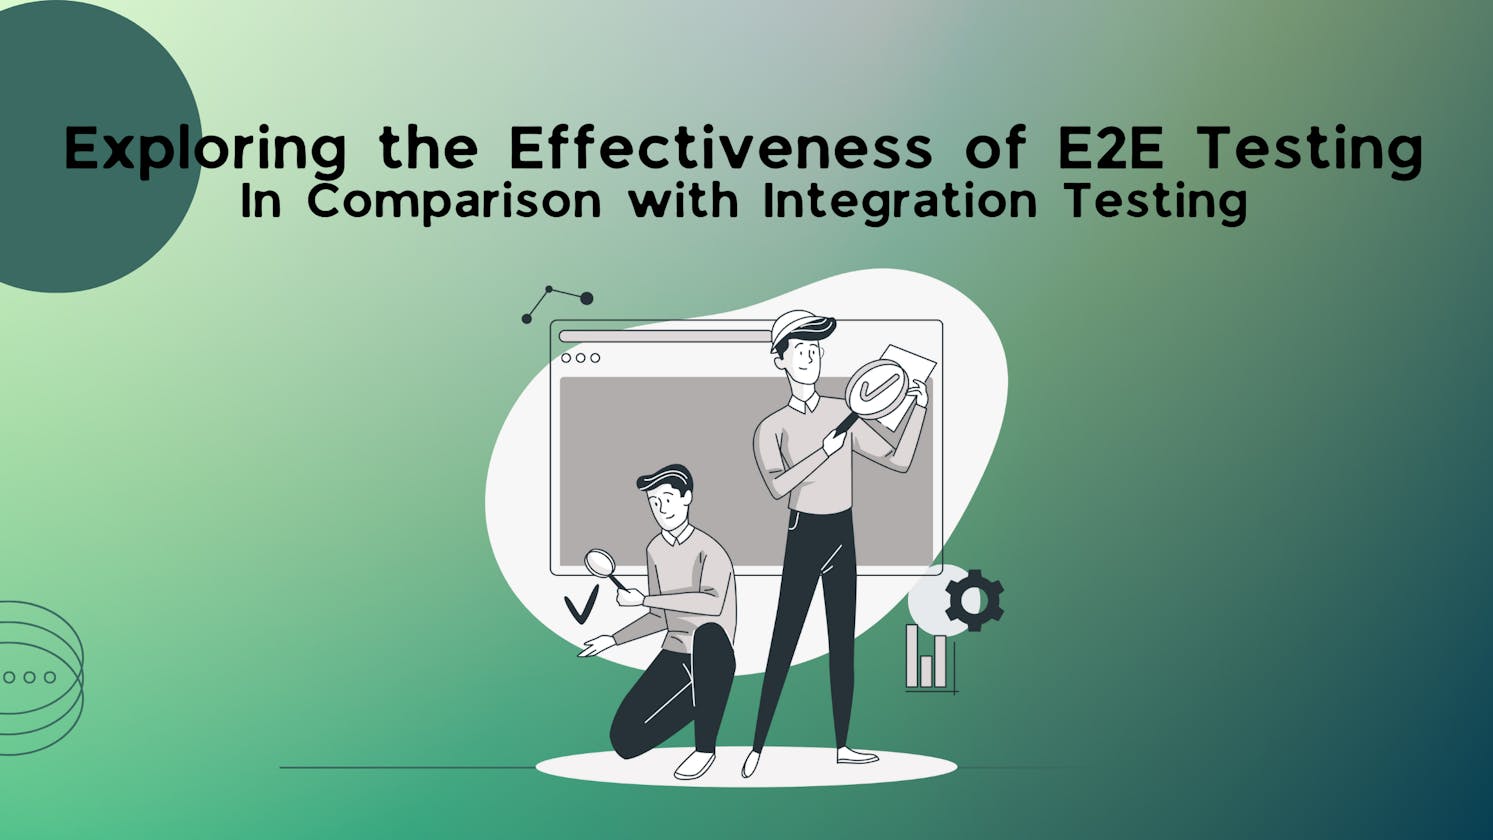 Exploring the Effectiveness of E2E Testing: In Comparison with Integration Testing